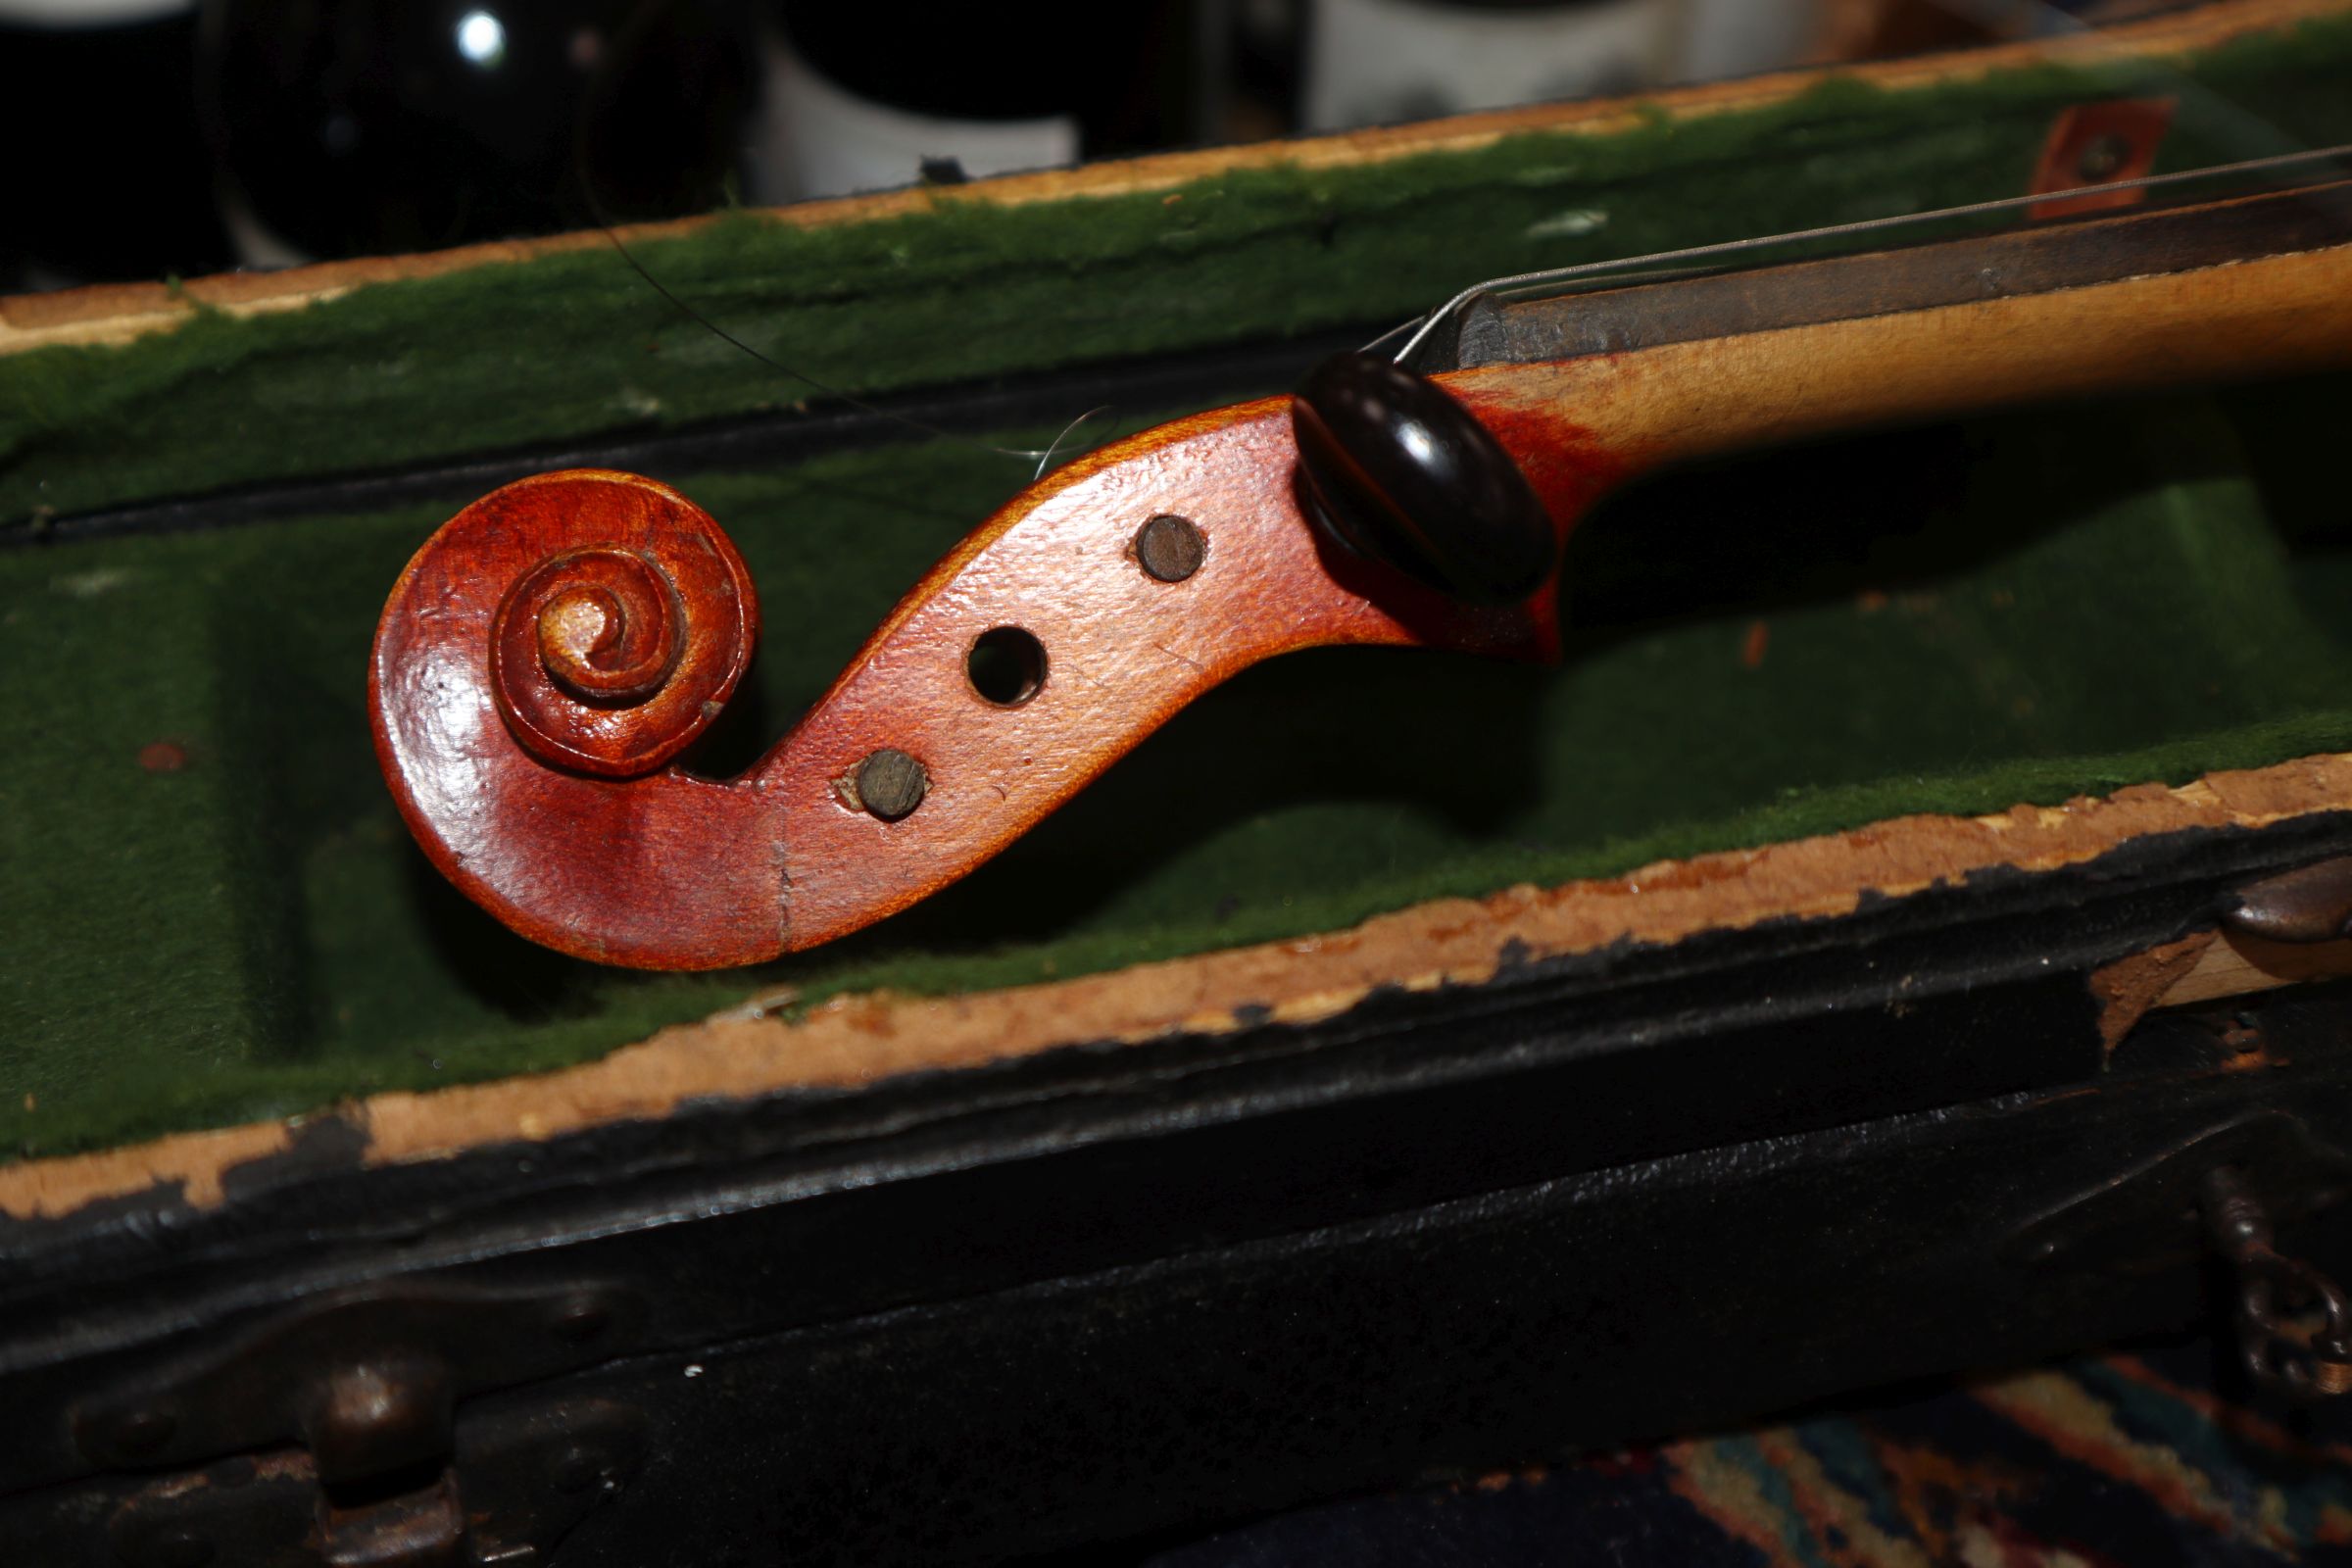 A German three-quarter size violin and bow, cased - Image 4 of 11